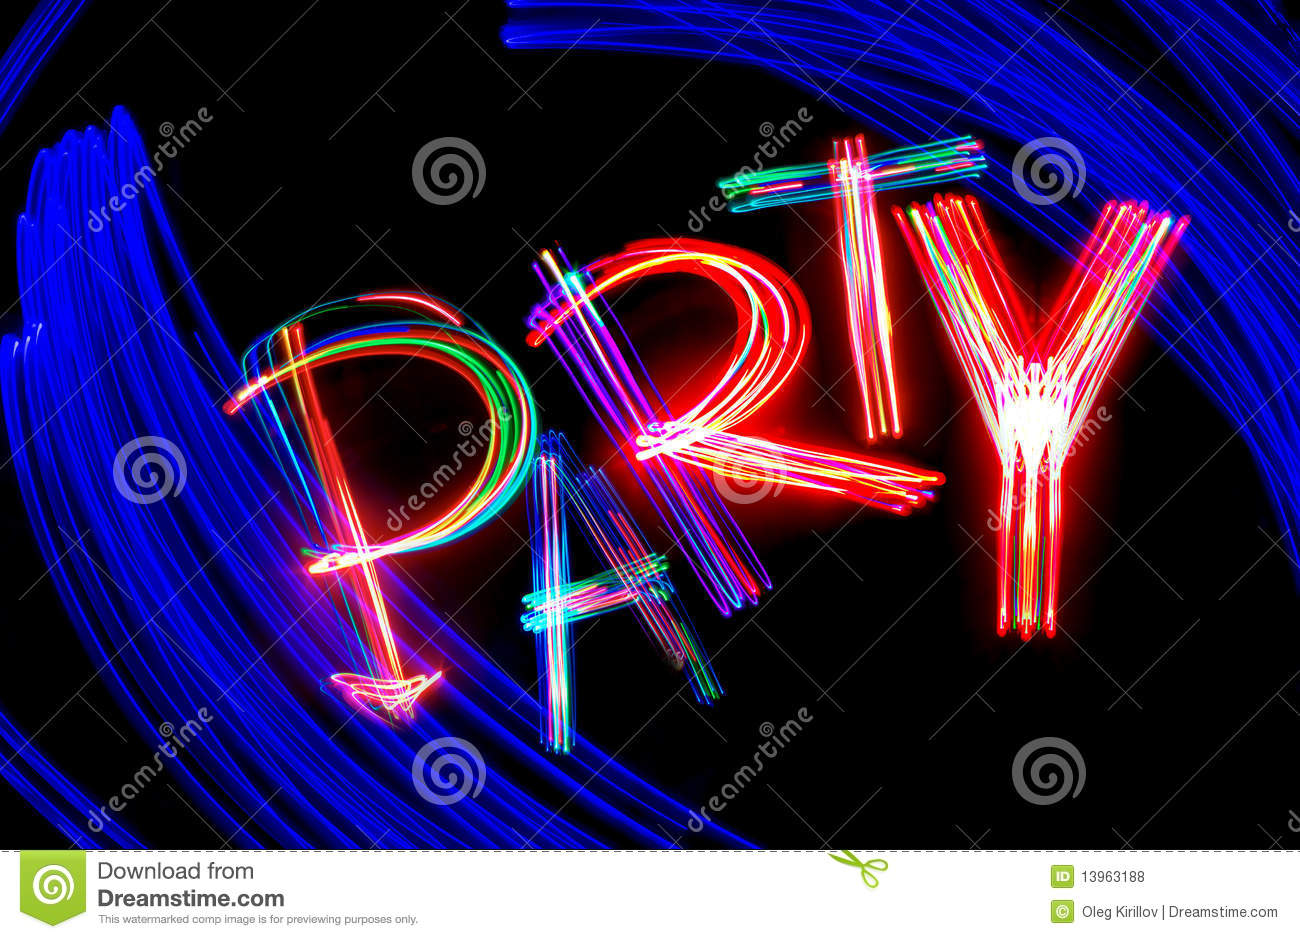 Neon Party Royalty Free Stock Photos   Image  13963188